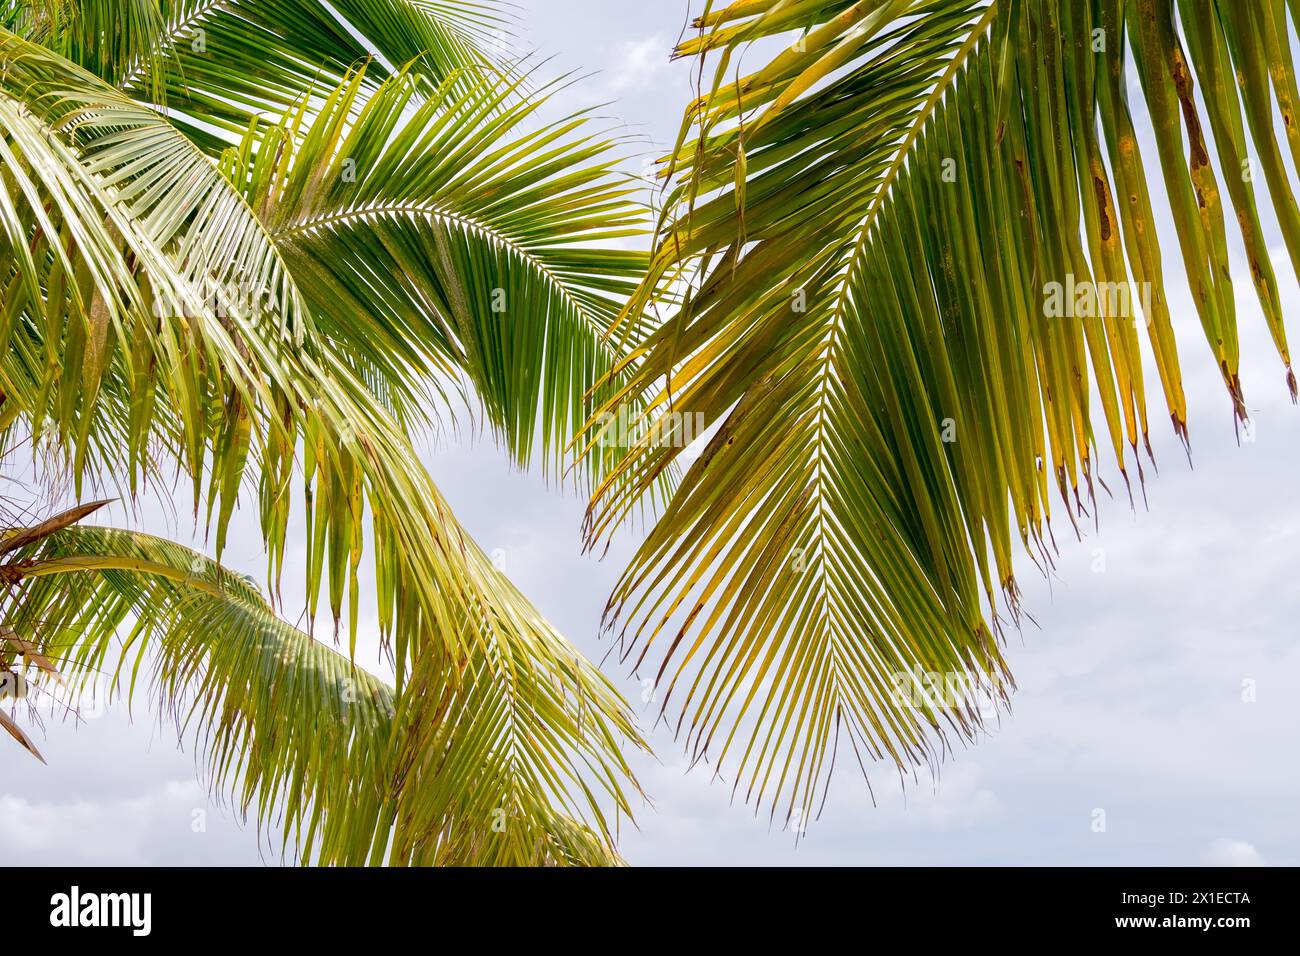 A palm tree with a few leaves is shown in the image. The sky is cloudy and the sun is shining through the clouds Stock Photo